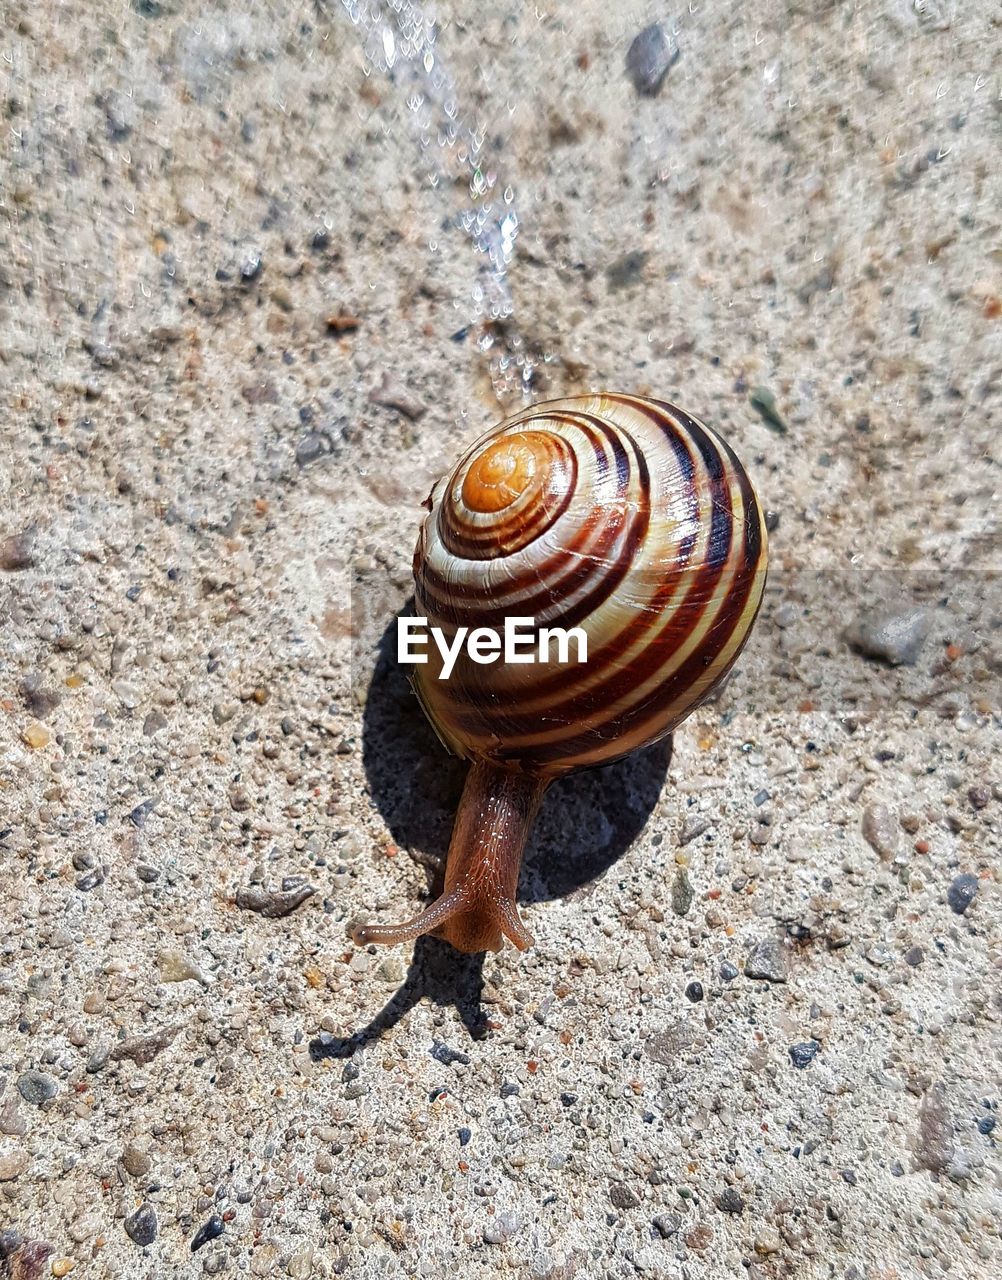 HIGH ANGLE VIEW OF SNAIL ON GROUND